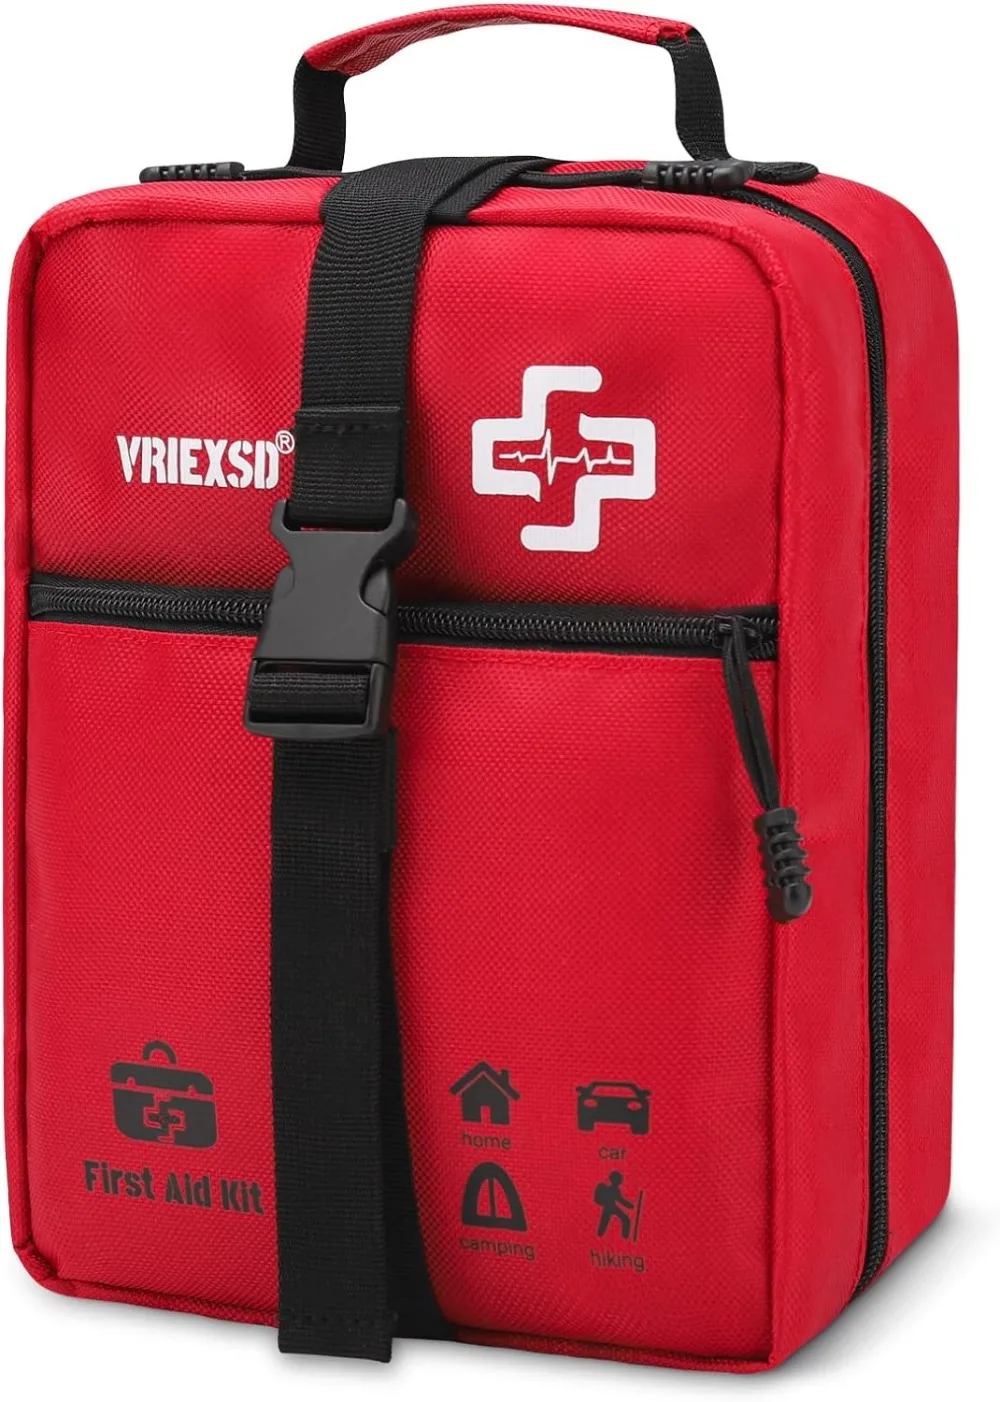 

400 Piece Large First Aid Kit Premium Emergency Kits for Home, Office, Car, Outdoor, Hiking, Travel, Camping, Survival Medical